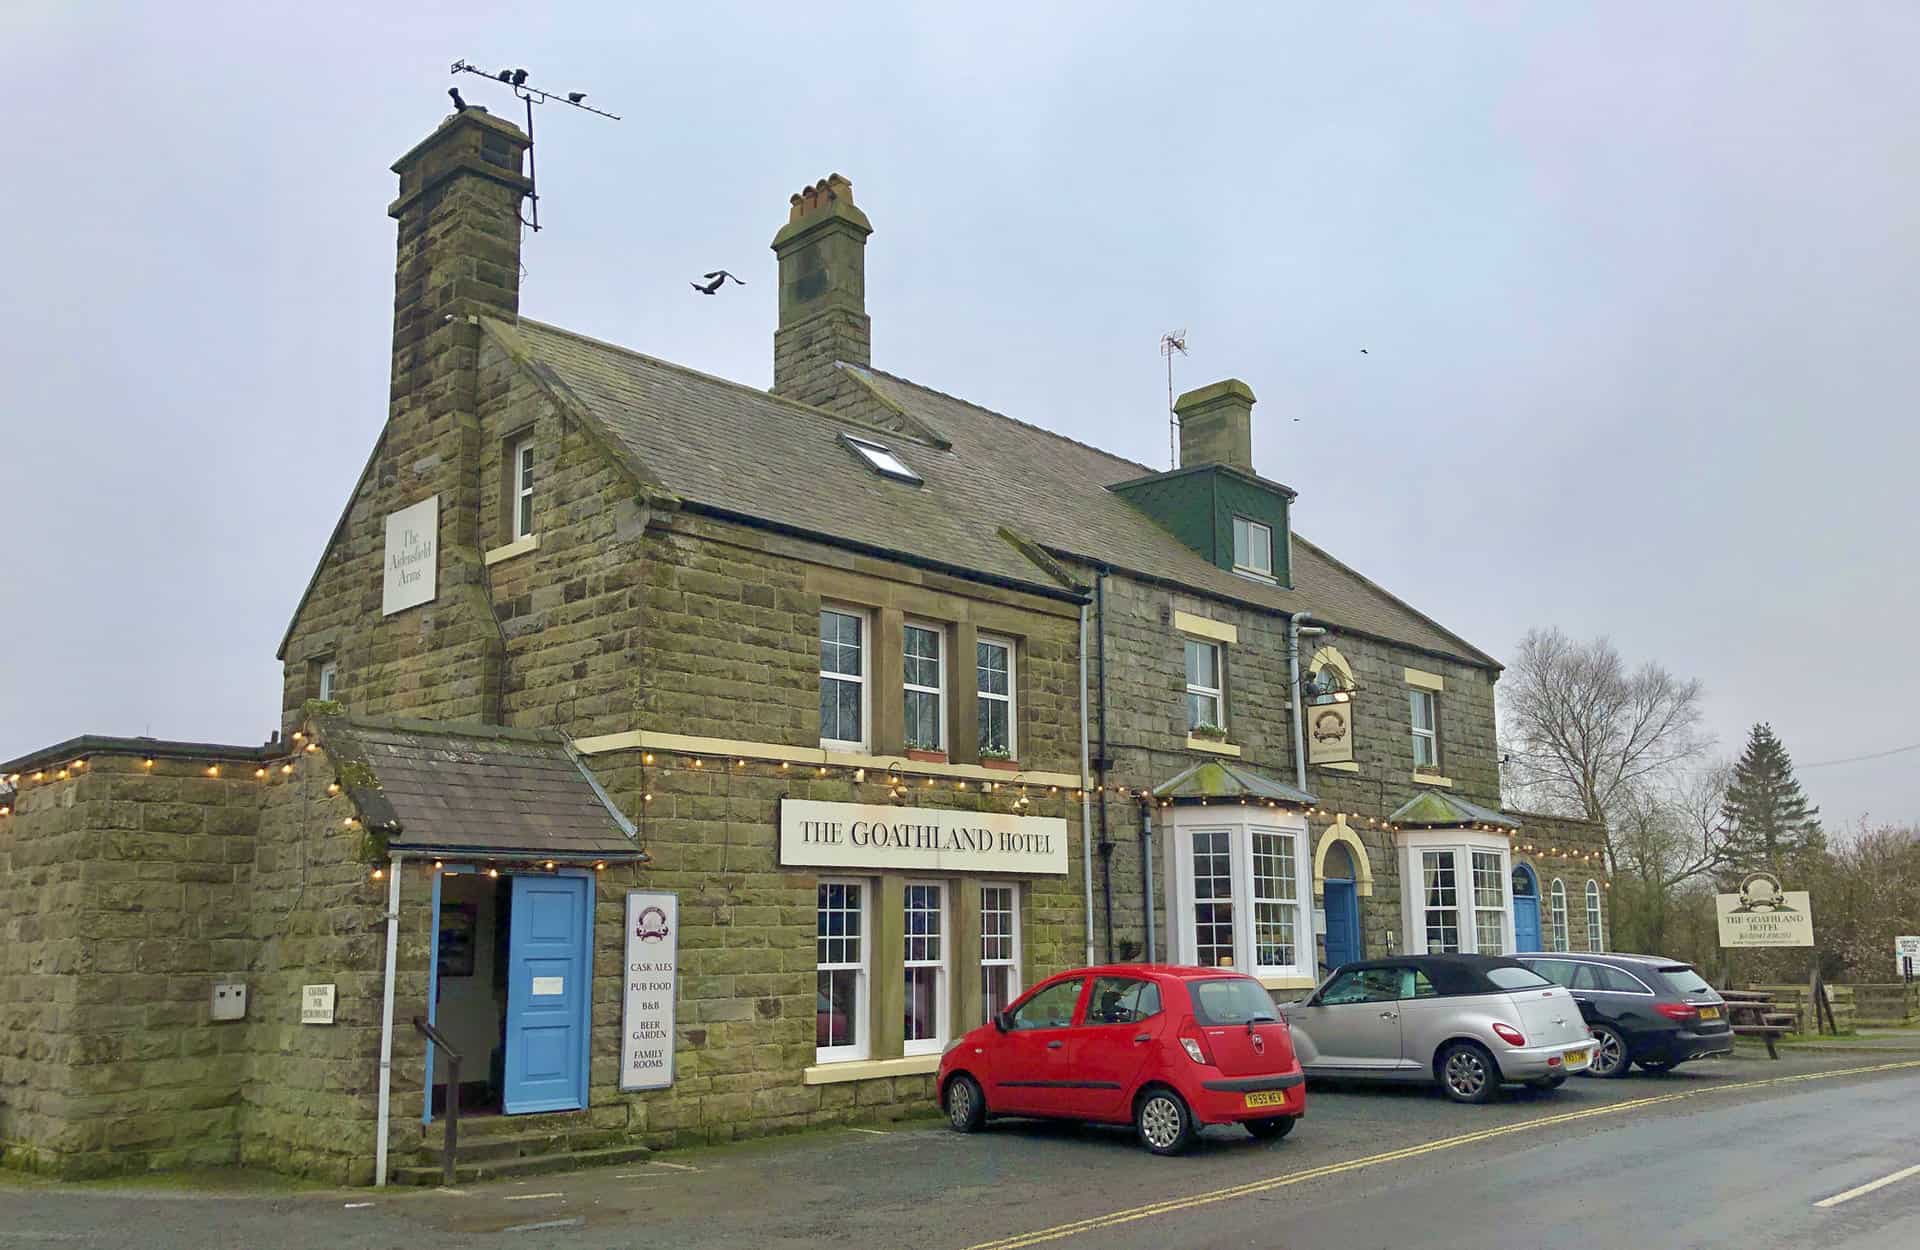 The Goathland Hotel better known as The Aidensfield Arms from the TV series Heartbeat.